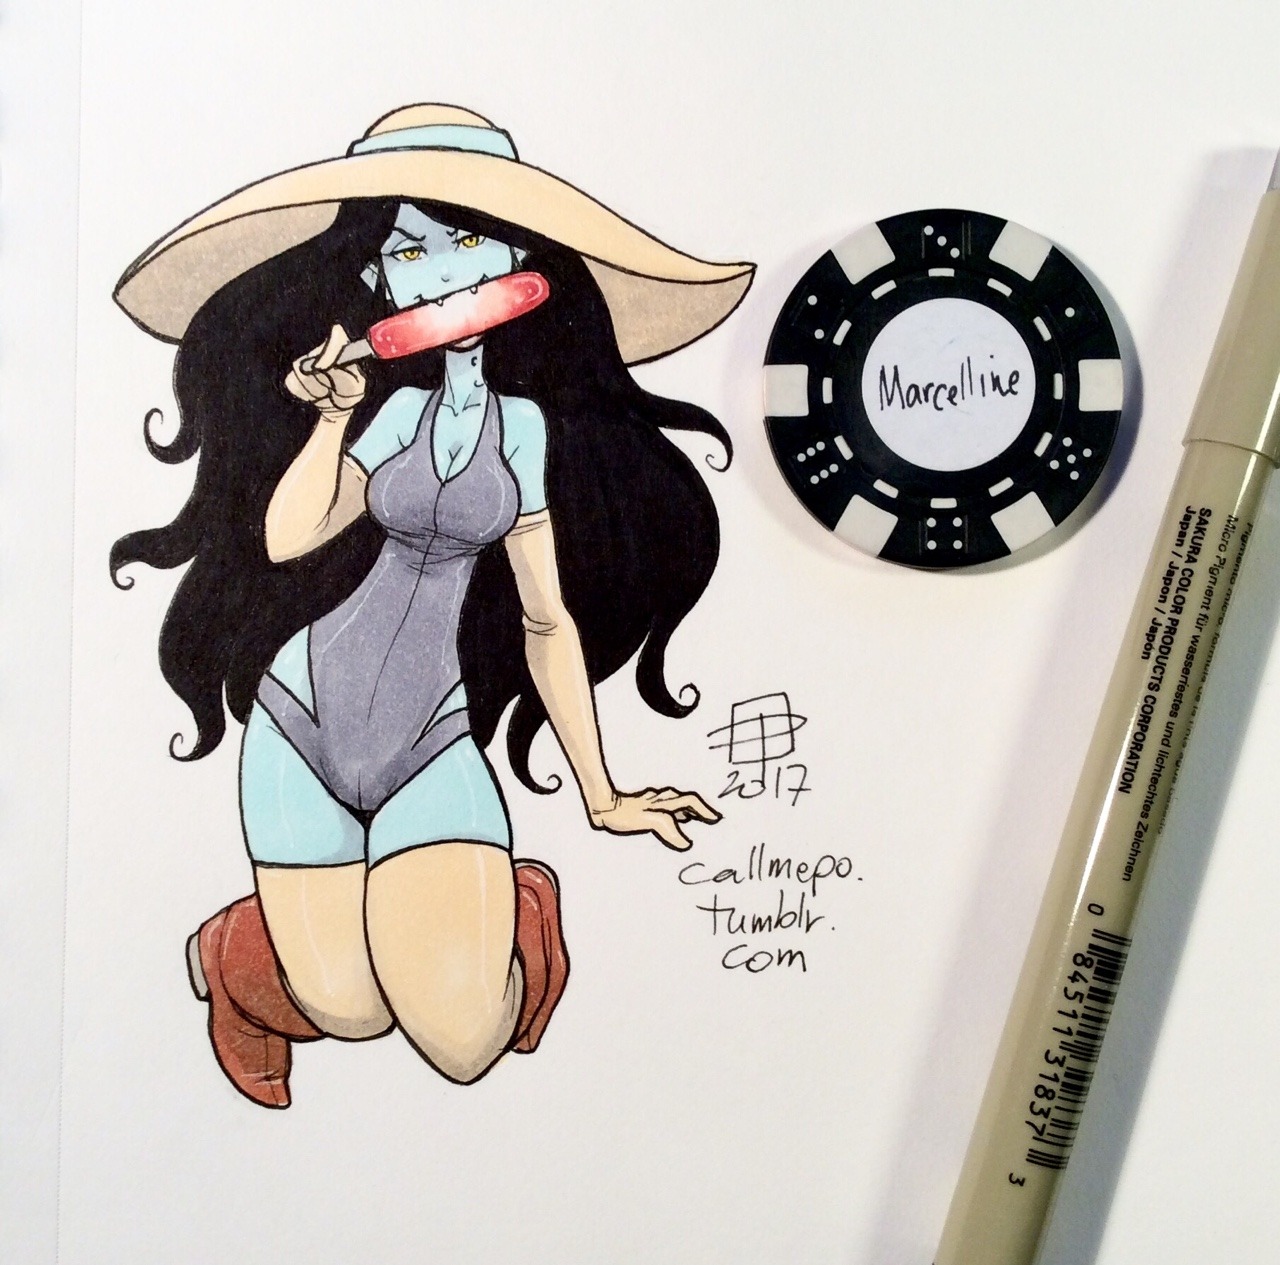 callmepo: I was waiting to do this one: a Marceline gothicle tiny doodle. ^_^  (Gotta